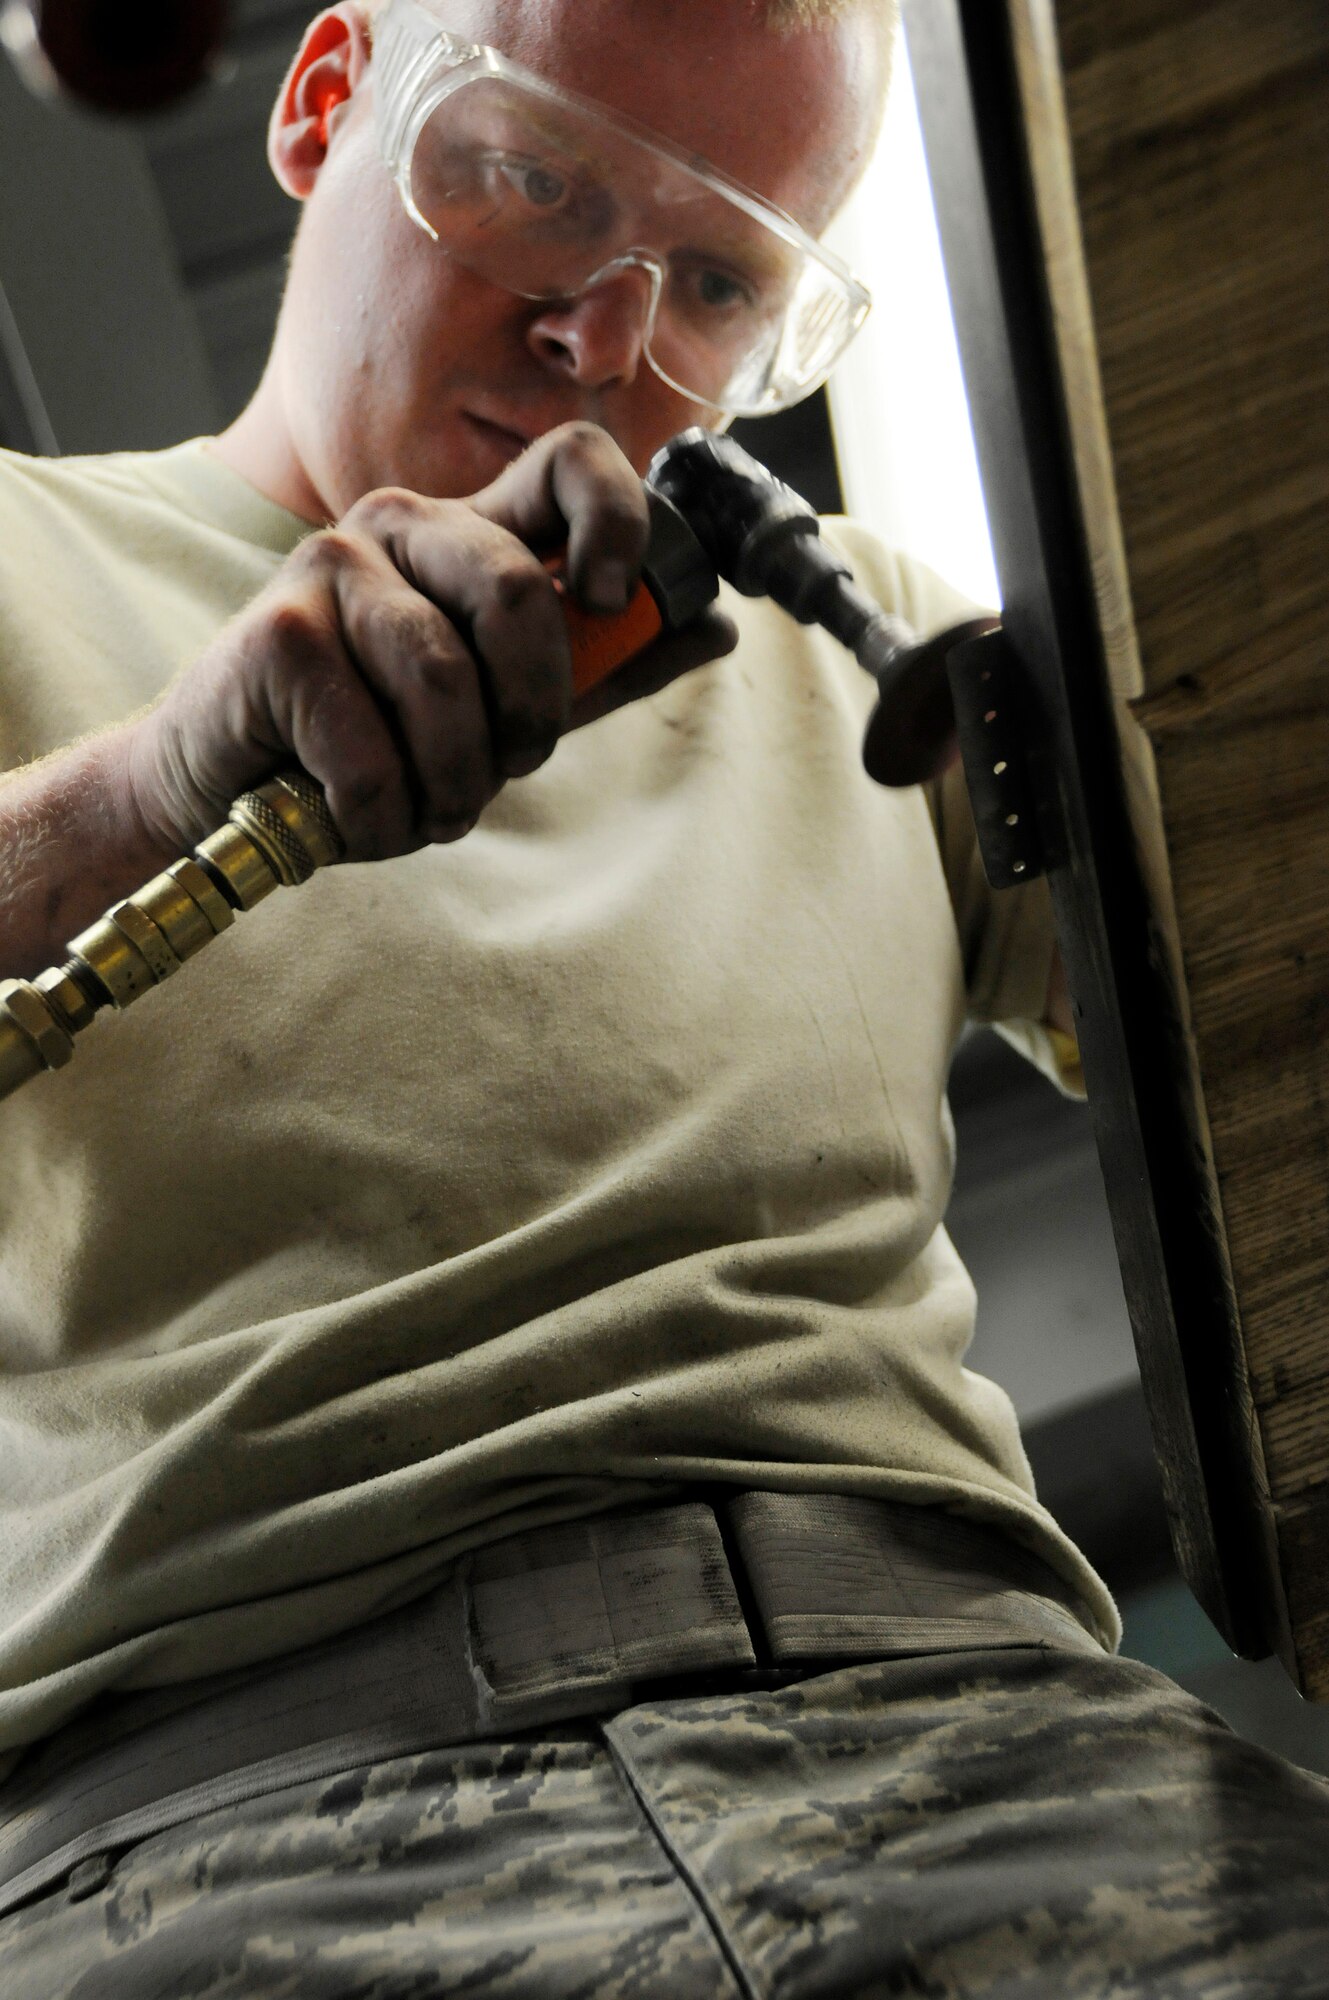 Staff Sgt. Ben Beermann, 379th Expeditionary Maintenance Squadron, Fabrication Flight, smoothes the edges of a patch he created Sep. 1, 2008, at an undisclosed air base in Southwest Asia. Sergeant Beermann, grinds the corner, smoothing out the edge of the patch that will fix a crack in an E-8C Joint Surveillance and Target Attack Radar System (JSTARS) aircraft cowling.  The non-flush patch provides structural integrity and keeps the elements out.  He measured, cut, punched in rivet holes and then smoothed out all the rough edges before attaching the patch to the cowling.  The JSTARS platform provides an airborne battle management, command and control, intelligence, surveillance and reconnaissance platform supporting Operations Iraqi and Enduring Freedom and Joint Task Force-Horn of Africa.  Its primary mission is to provide theater ground and air commanders with ground surveillance to support attack operations and targeting that contributes to the delay, disruption and destruction of enemy forces.  Sergeant Beermann, a native of Dakota City, Neb., is deployed from Robins Air Force Base, Ga.  (U.S. Air Force Base photo by Tech. Sgt. Michael Boquette/Released)